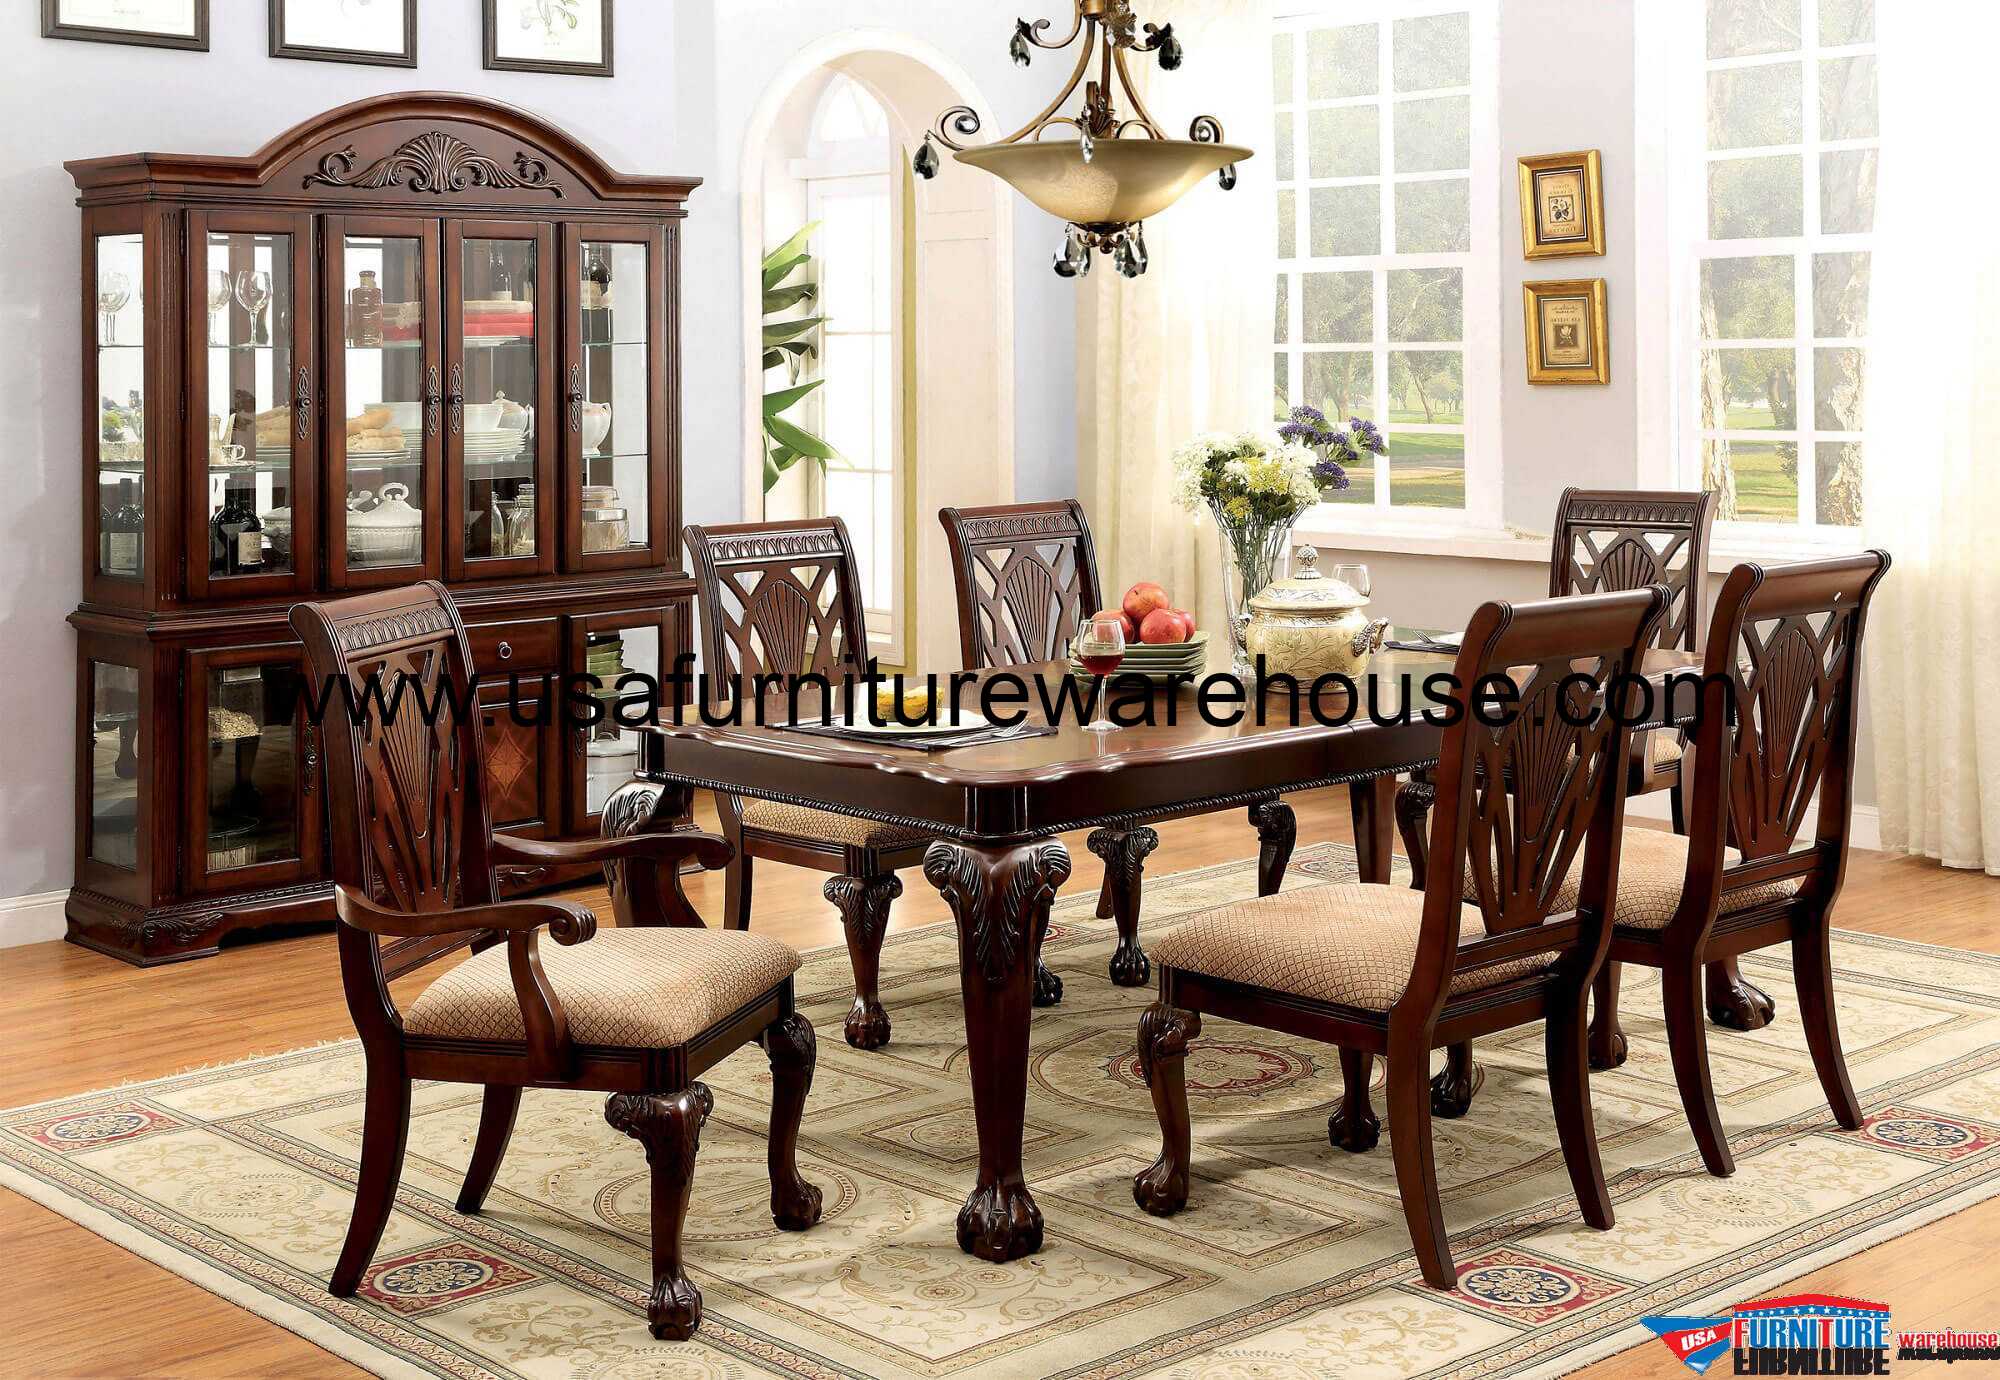 9 Piece Petersburg I Dining Set in Cherry Finish - USA Furniture Warehouse